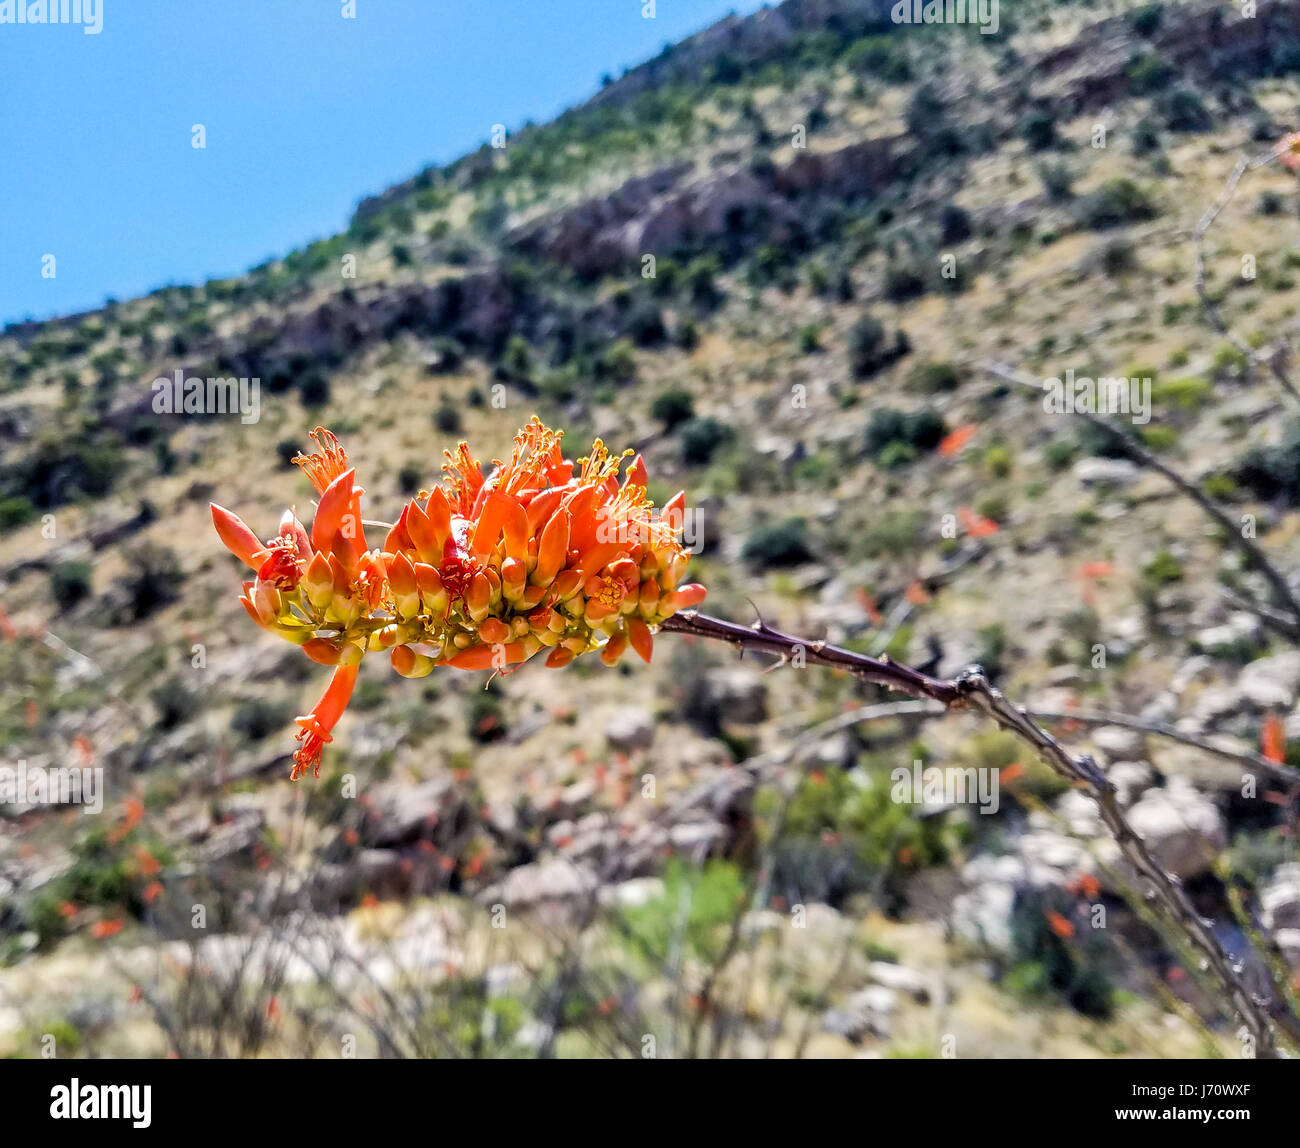 Ocotillo bloom. Fouquieria splendens (commonly known as ocotillo) is also called coachwhip, candlewood, slimwood, desert coral, Jacob's staff, Jacob c Stock Photo